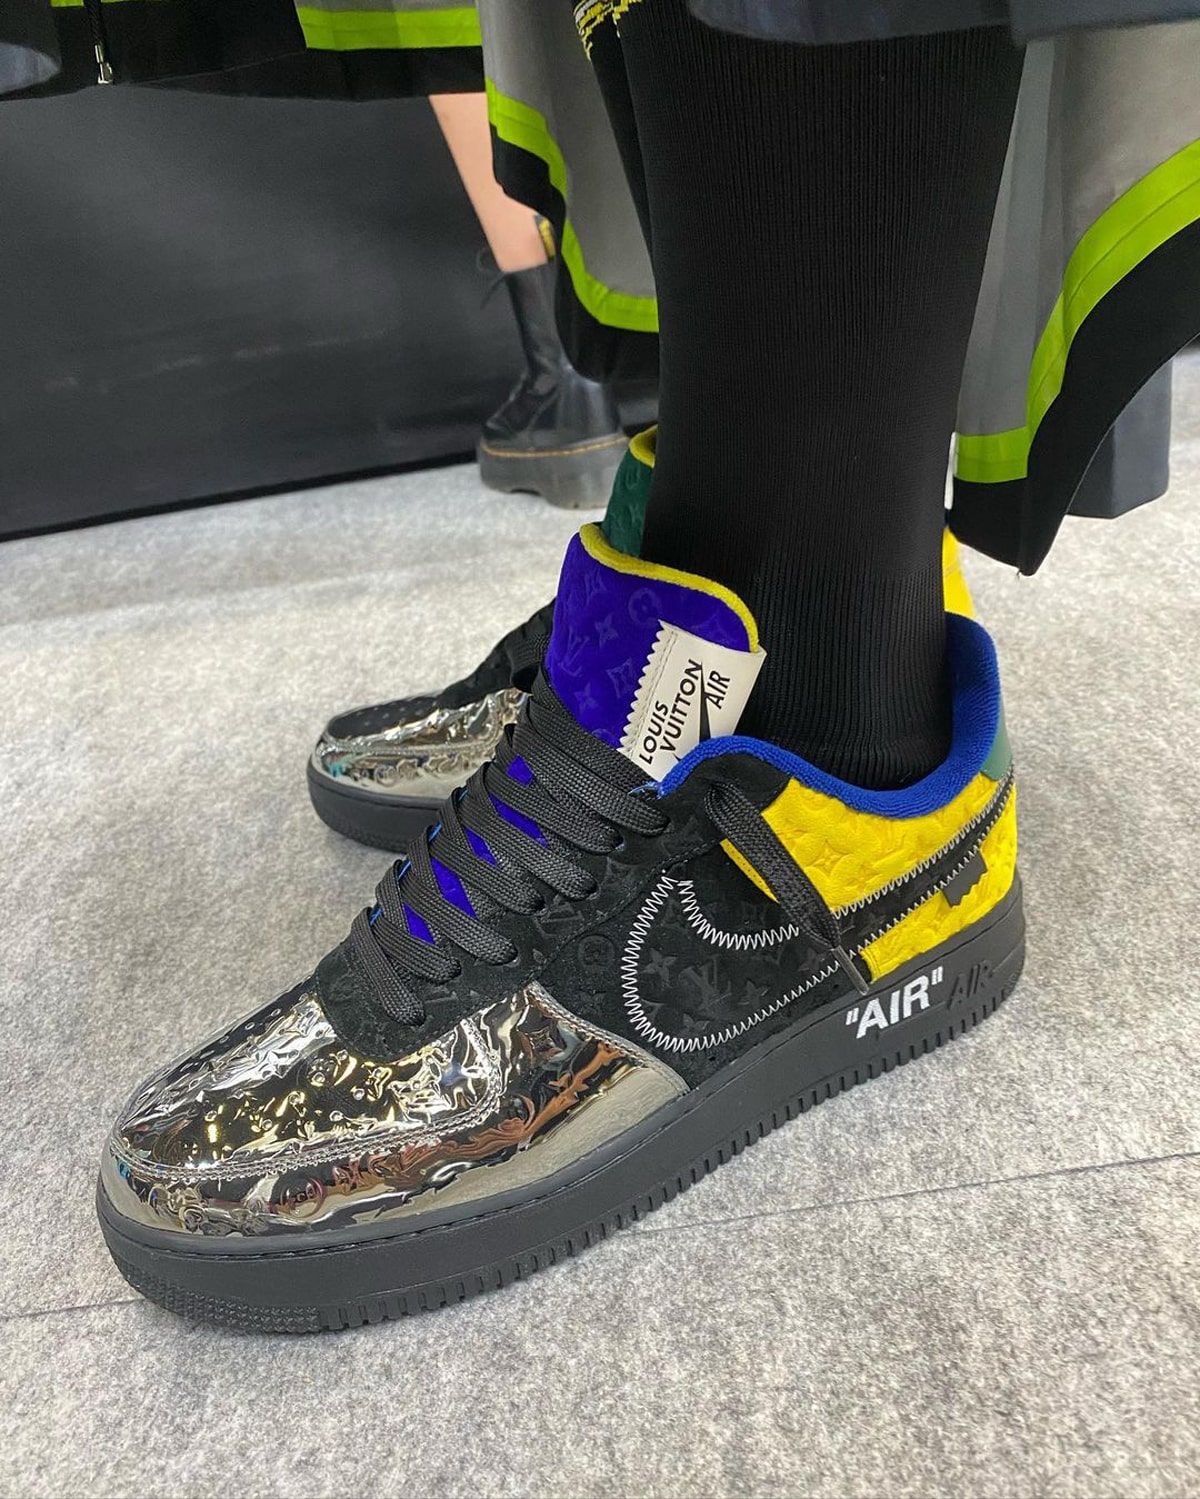 Louis Vuitton x Off White x Air Force 1: Potential release date and more